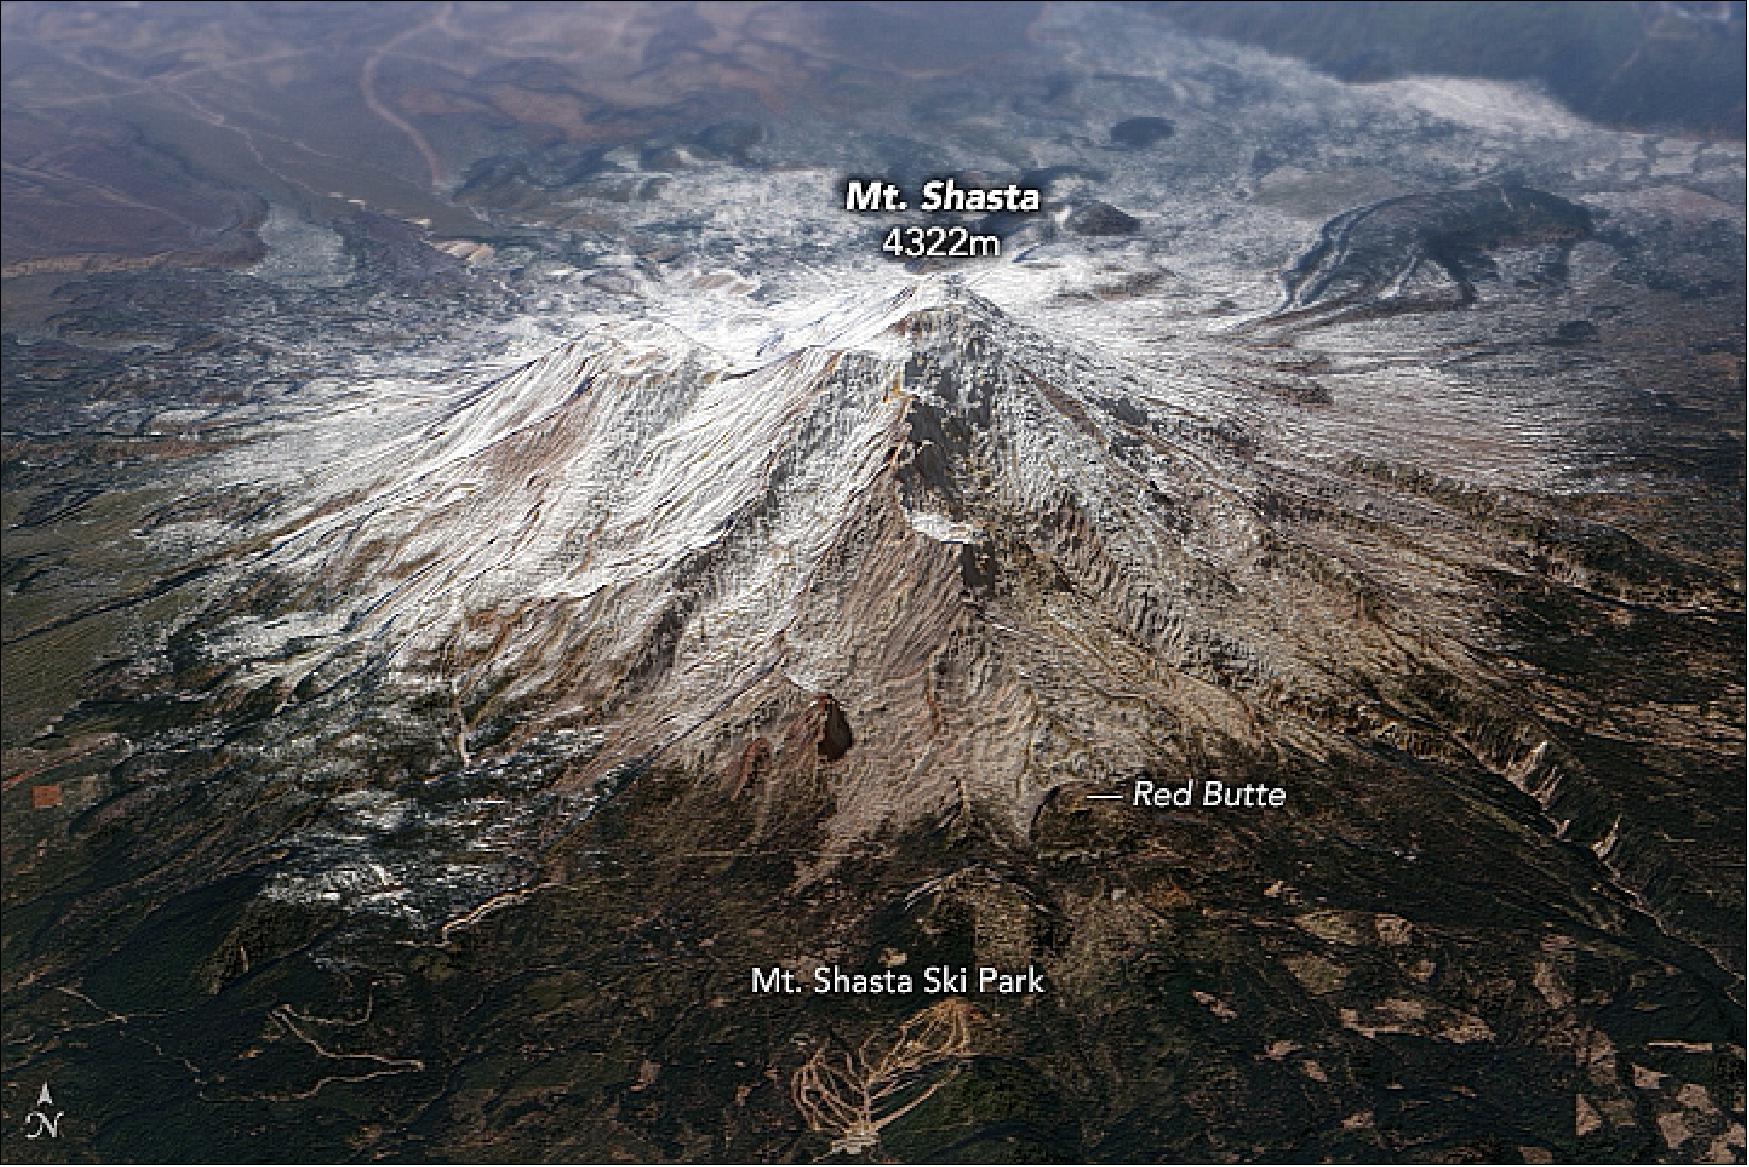 Figure 43: Towering above the horizon at 14,179 feet (4,322 m), Mount Shasta is sure to catch the eye of hikers. This majestic volcano in Northern California is at least partly visible from the trail for at least 500 miles. The image shows the space-based view of the mountain on November 1, 2013, acquired with the OLI on Landsat-8 and draped over topographic data (image credit: NASA Earth Observatory, image by Joshua Stevens and Robert Simmon, using Landsat data from the U.S. Geological Survey and topographic data from the Shuttle Radar Topography Mission (SRTM). Story by Kathryn Hansen)